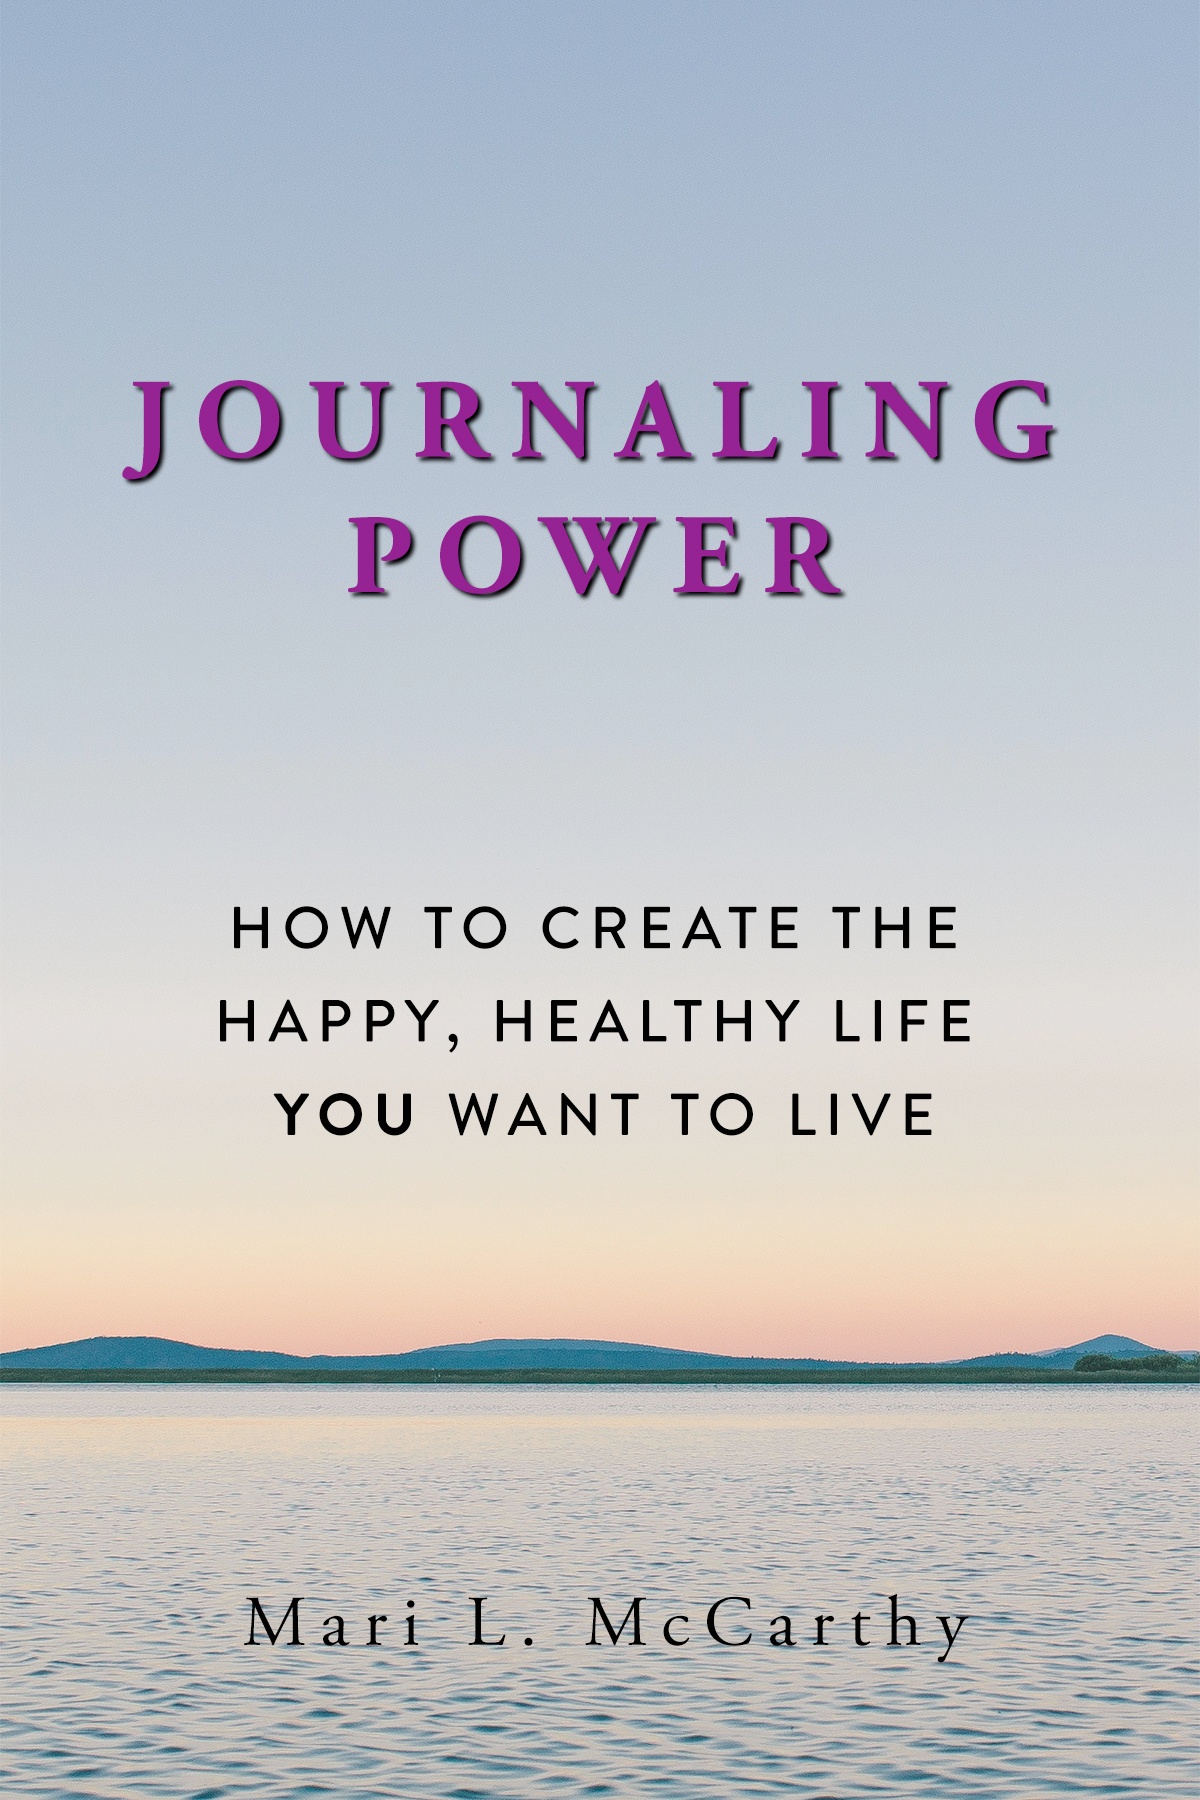 Journaling Power Book Launches Today--Tons of Bonuses for You!